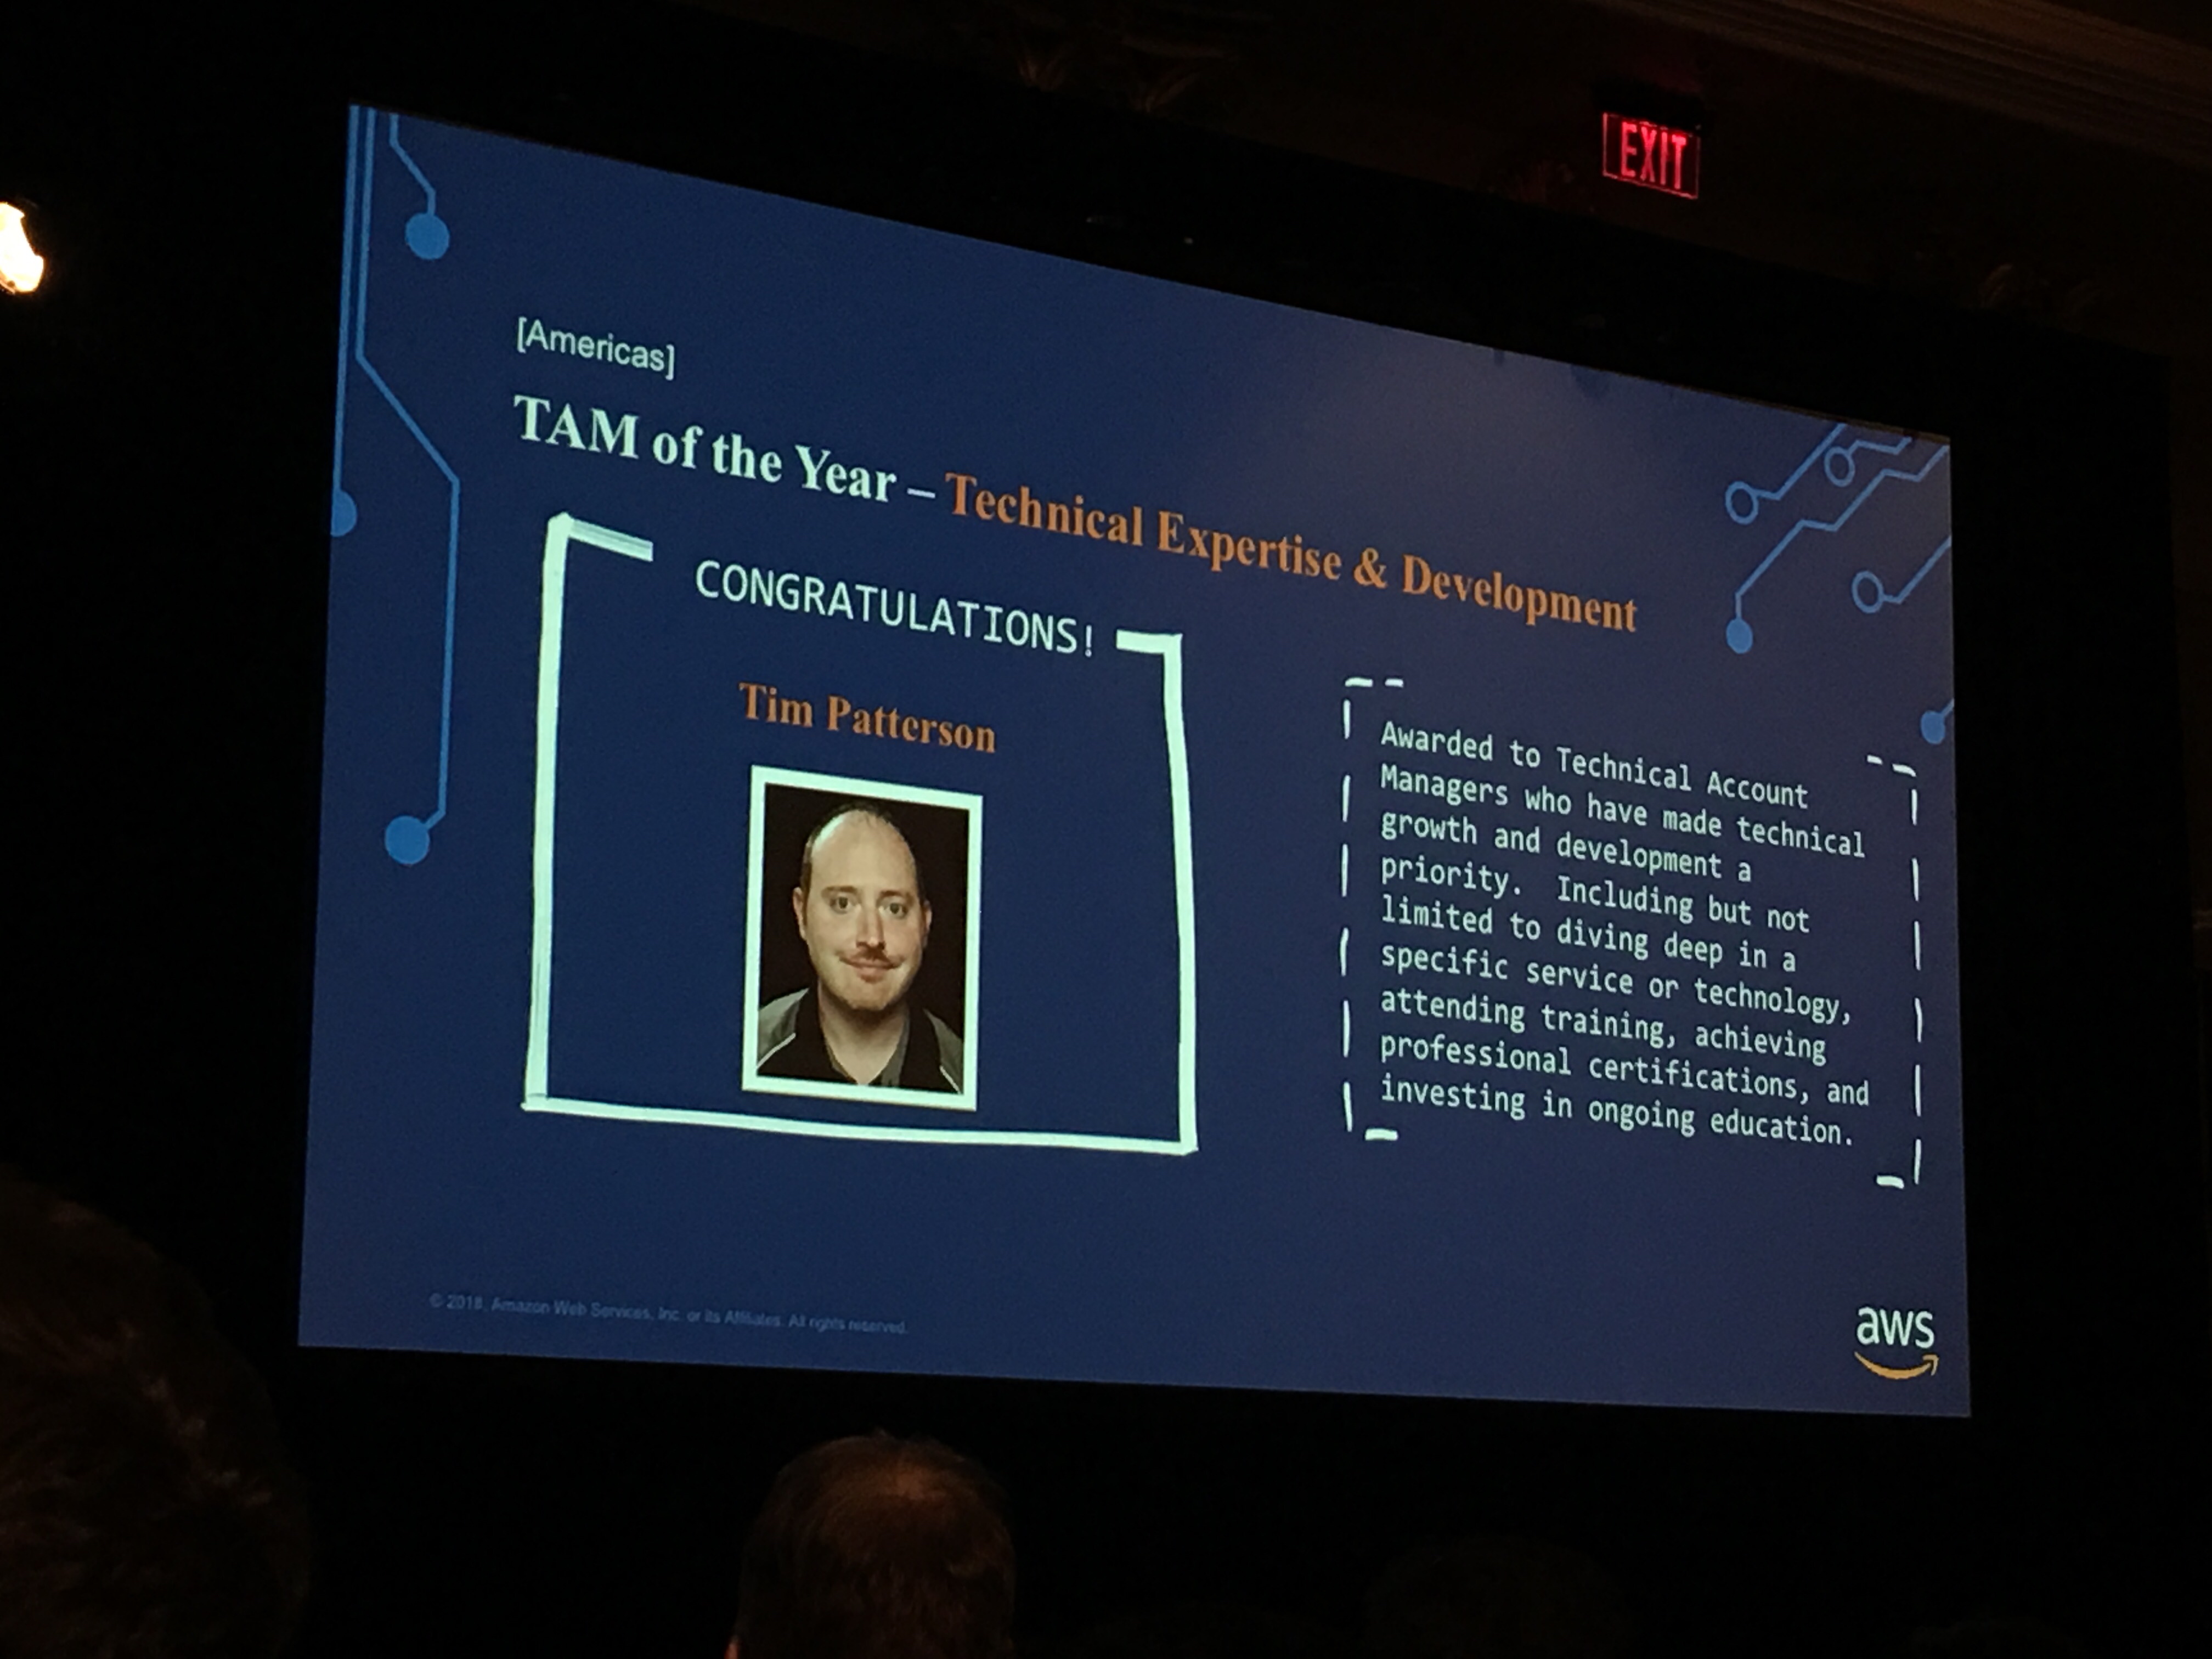 My name announced as the TAM of the year!